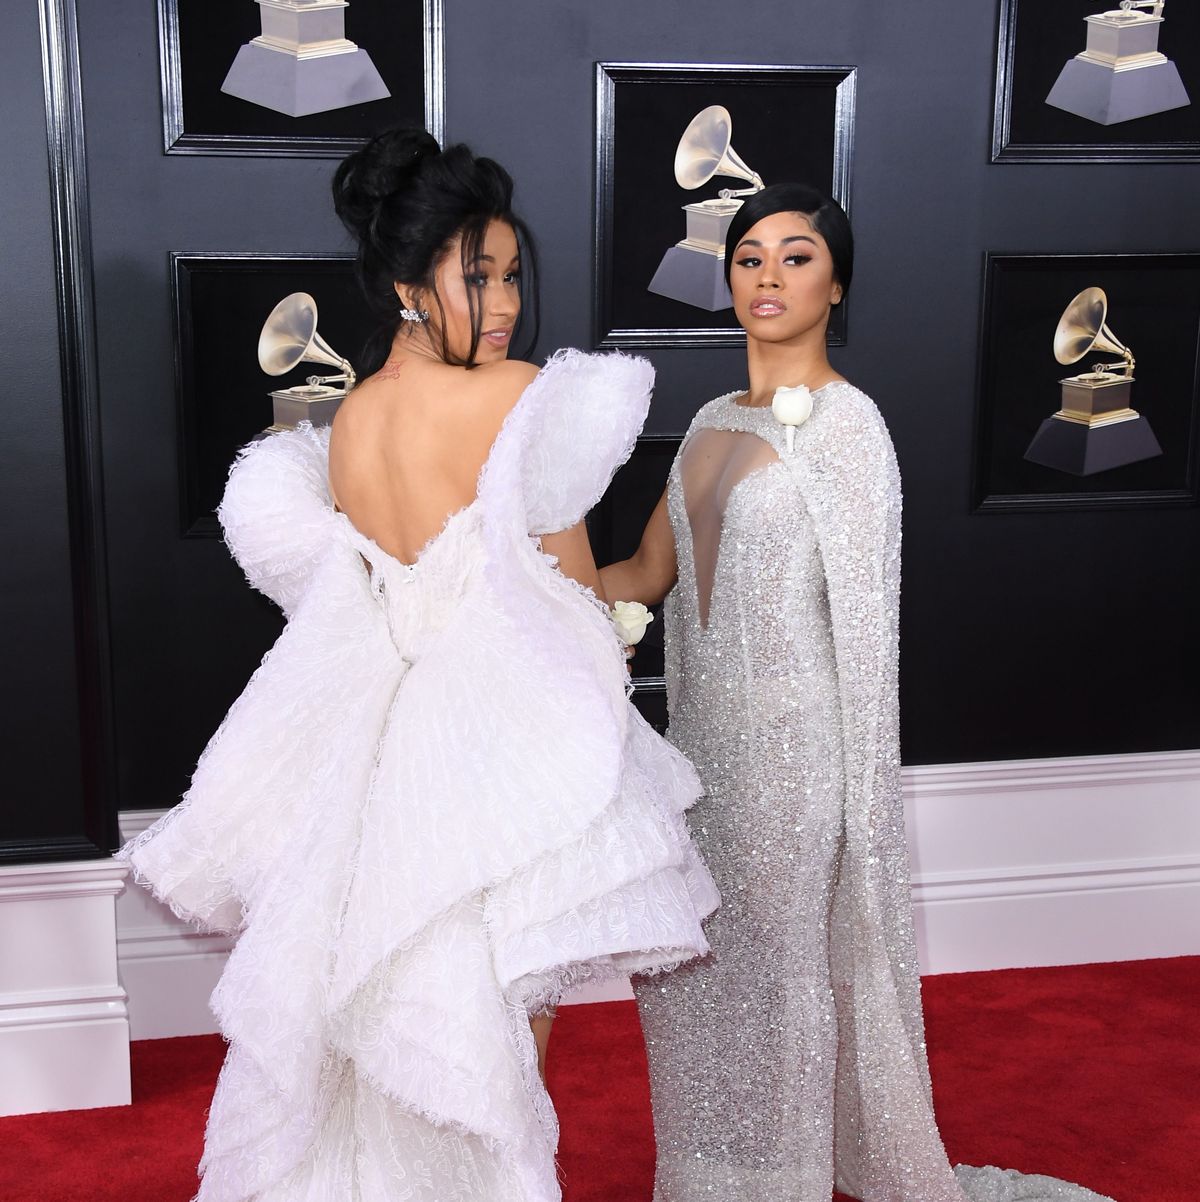 Cardi B and Her Sister Hennessy Won the Grammys Red Carpet